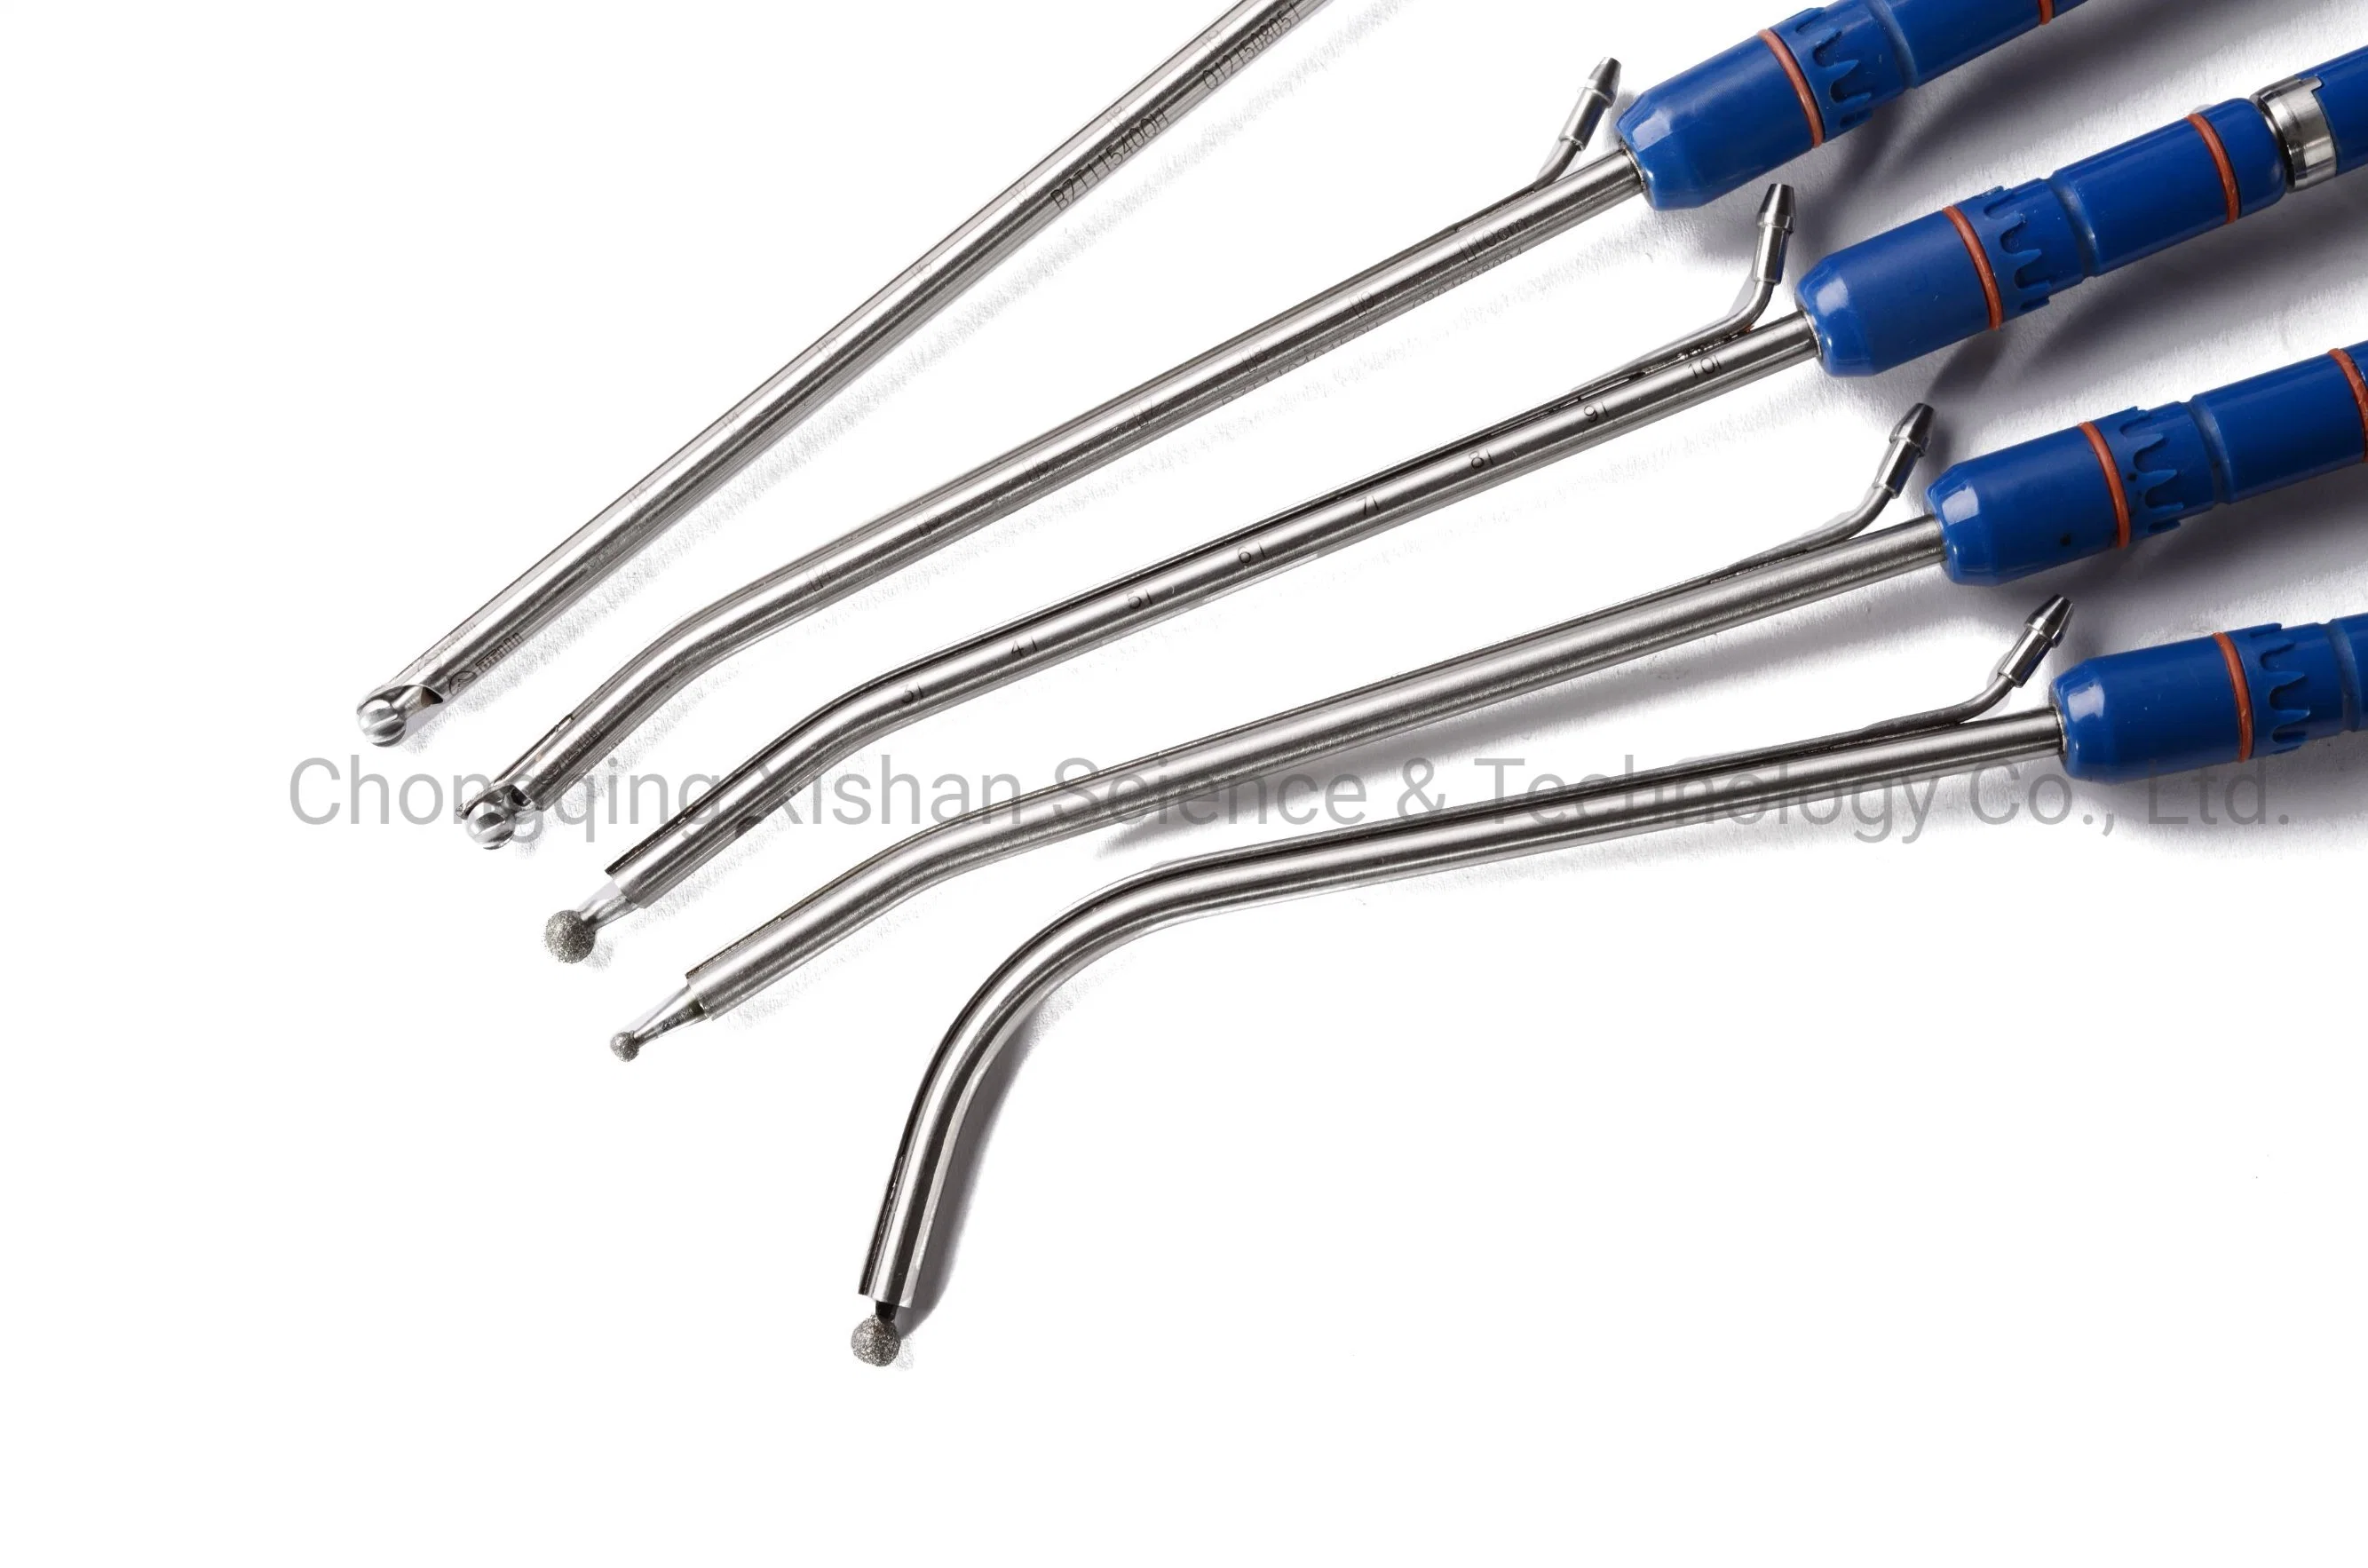 Surgical Consumables for Nose/Drill for Ent/Nasal Shaver/Surgical Blade/Shaving Blade/Ent Drill/High Speed Bur/Micro Bur